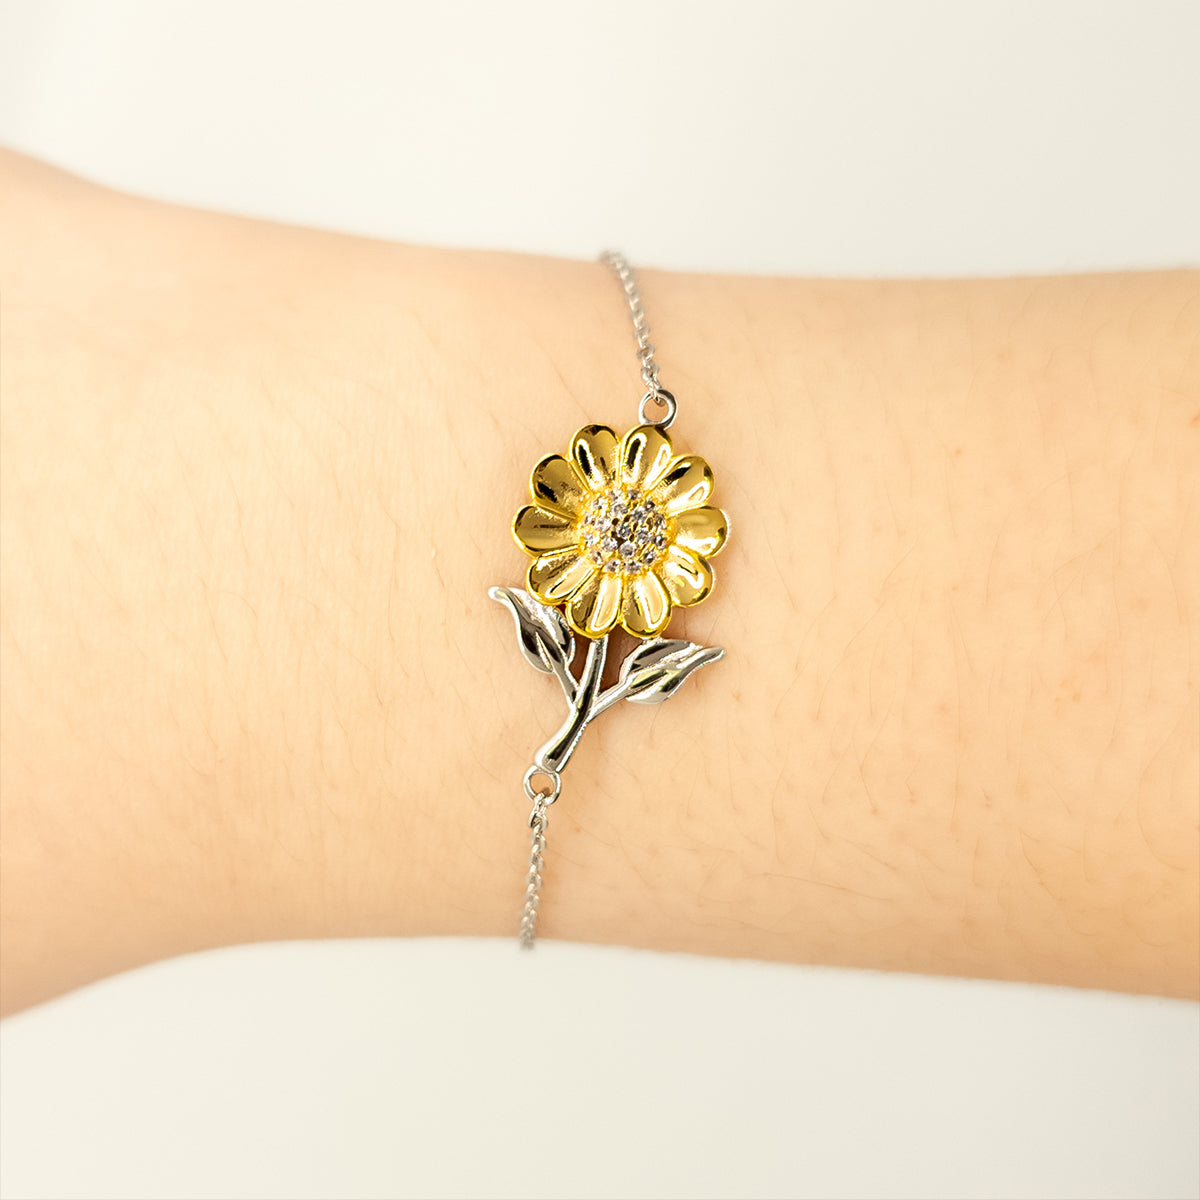 Grandmom Sunflower Bracelet - Engraved Gift for Birthday, Christmas, and Holidays - Special Place in My Heart - Unique Jewelry for Grandmother